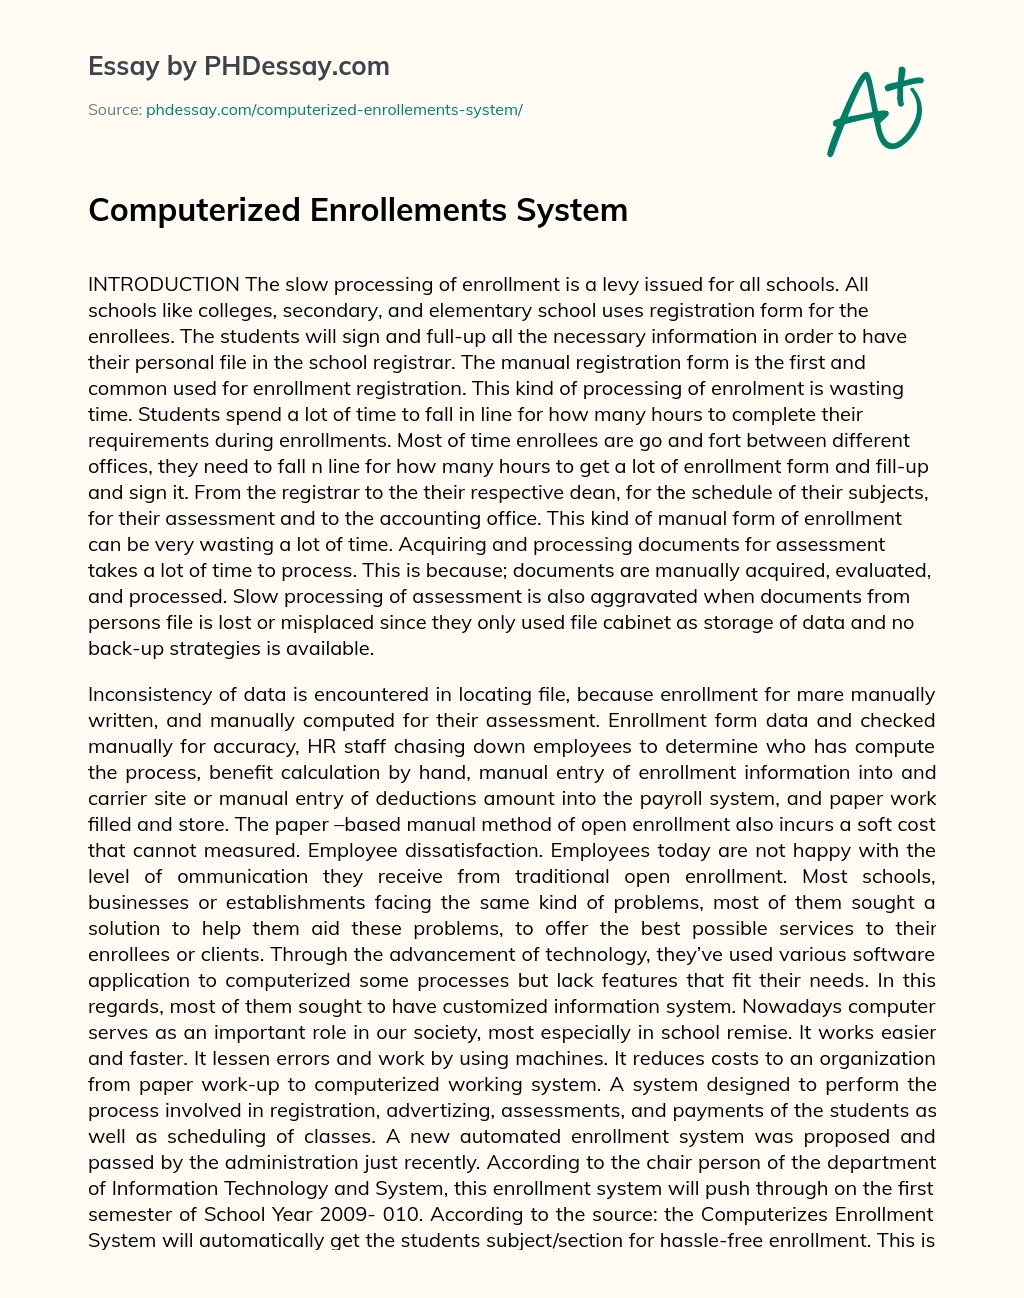 Computerized Enrollements System essay